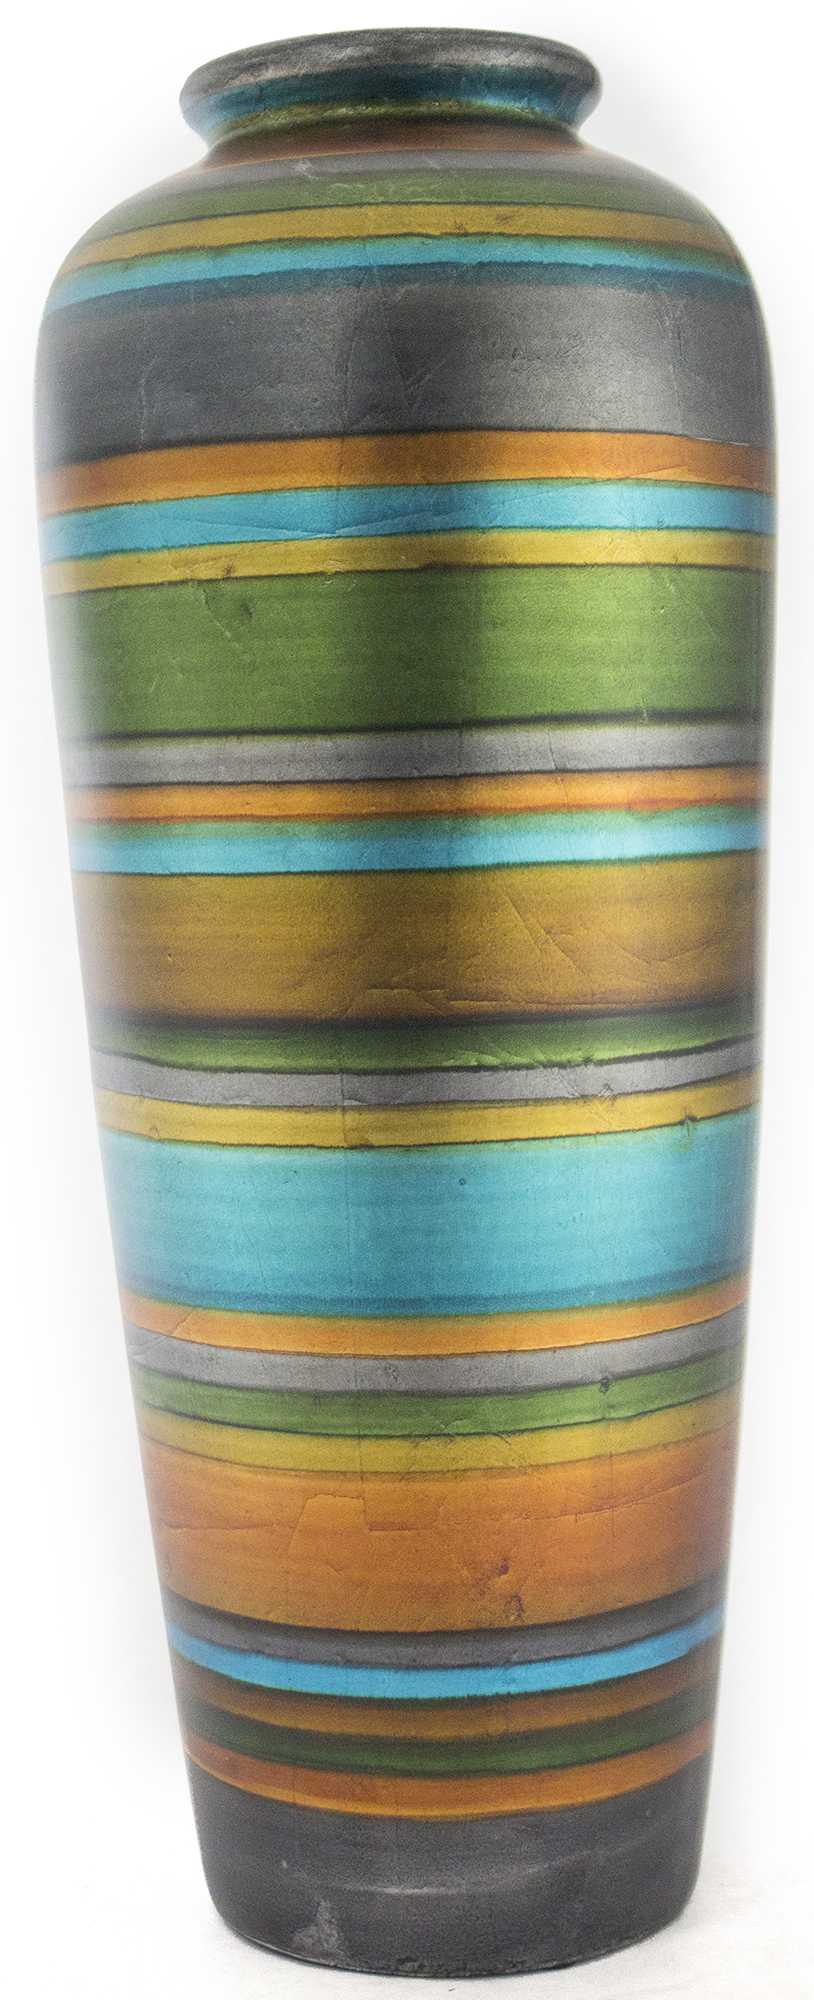 8" X 8" X 20" Blue, Green, Gold, Copper And Pewter Ceramic Water Jug Floor Vase